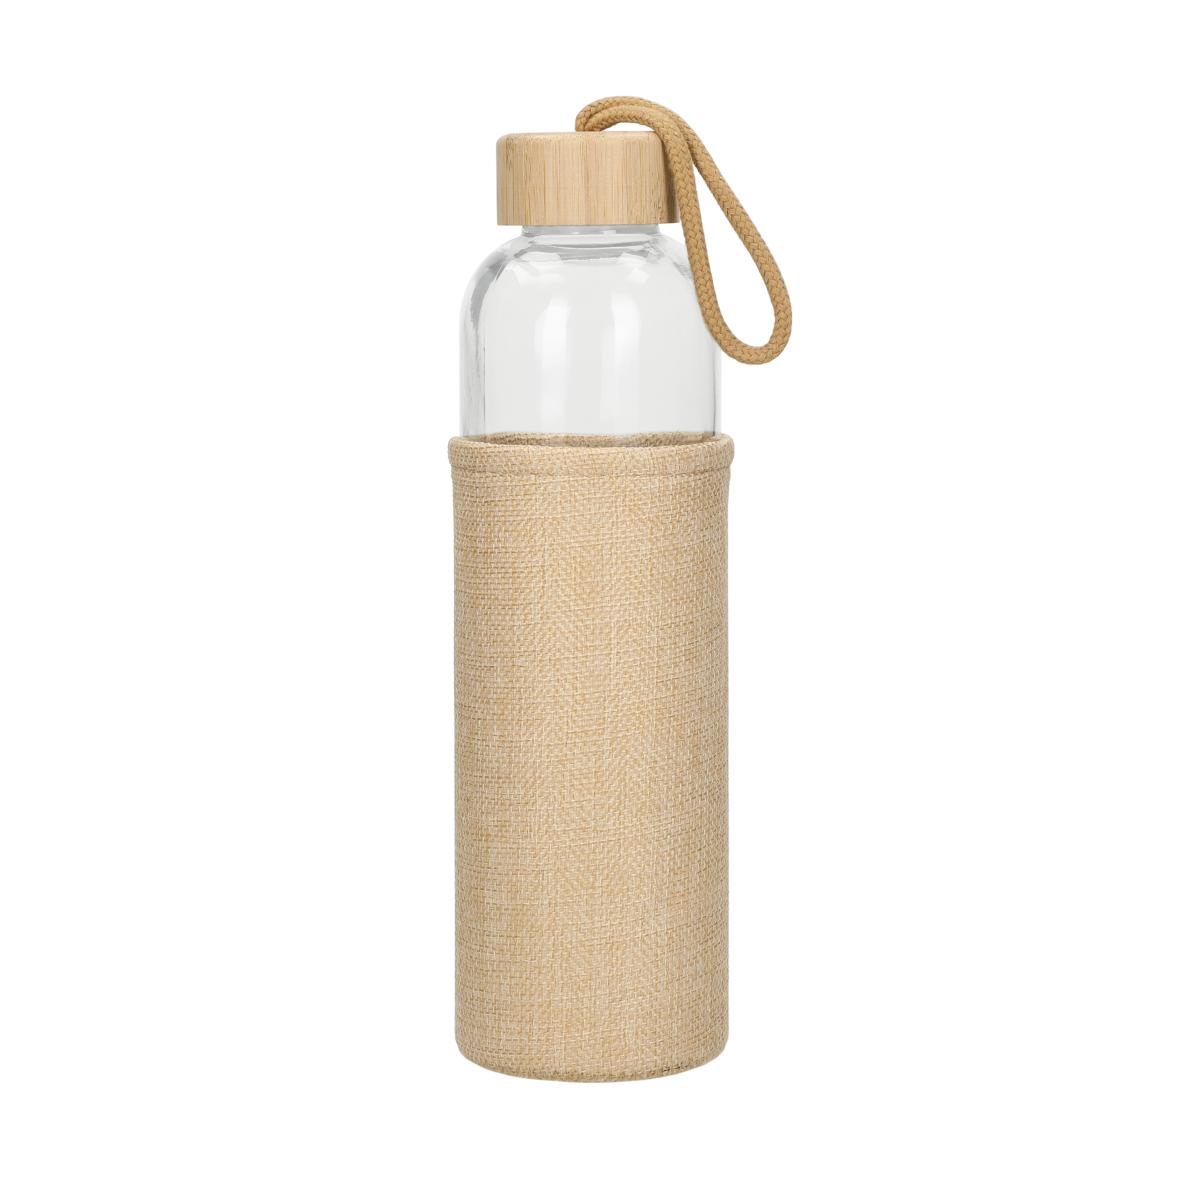 Bamboo-Capped Soda Lime Glass Drinking Bottle - Northiam